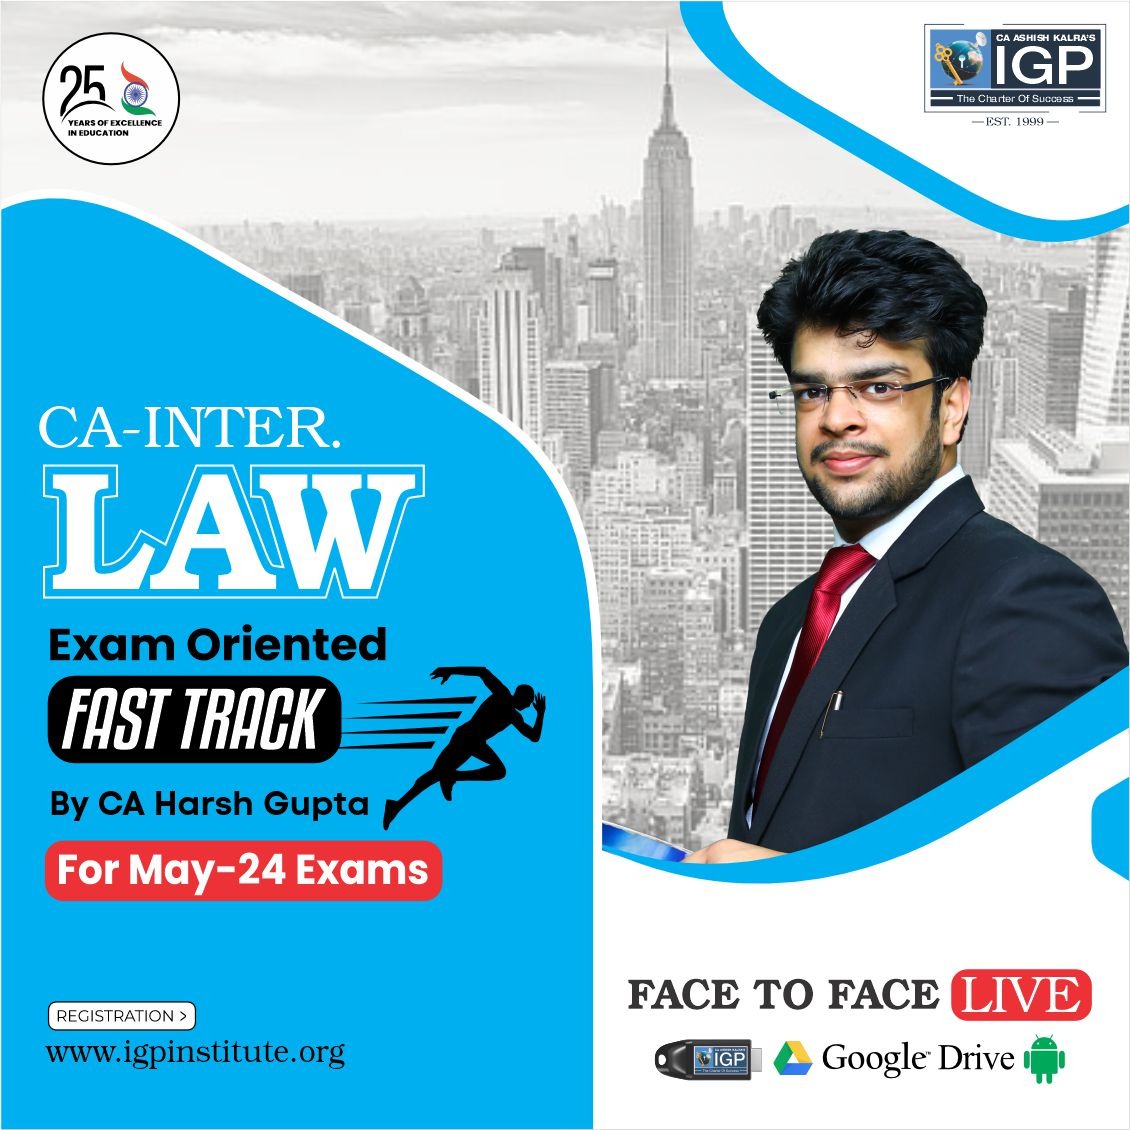 CA Inter Law Exam-Oriented Fast-Track Batch -CA-INTER-Corporate Laws and Other Laws- CA Harsh Gupta